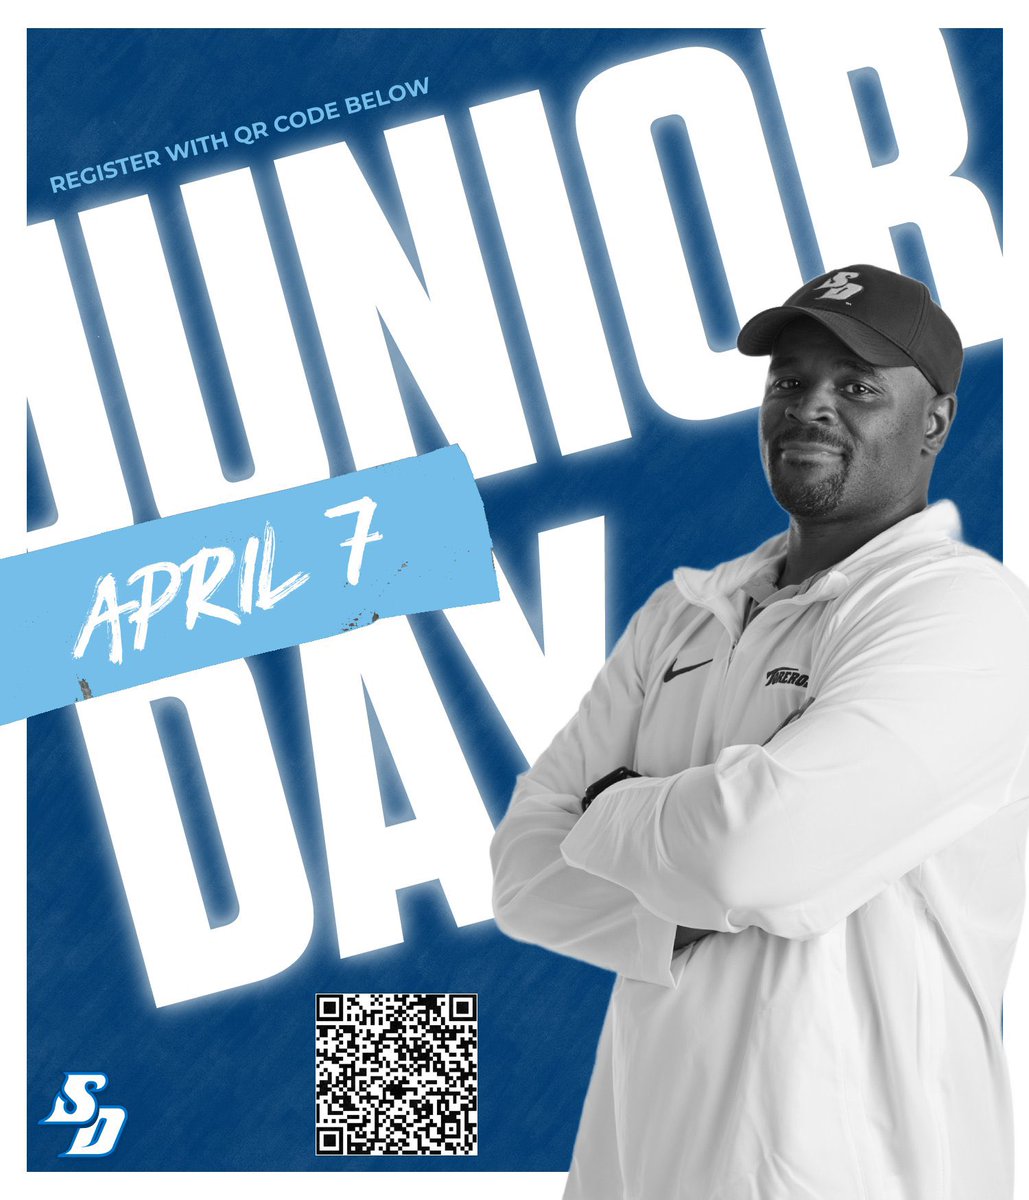 ✌️Weeks left until Junior Day! Come check out the #️⃣1️⃣ most beautiful campus in the country and meet the Torero coaches. Registration starts at 9 AM. Register with the QR Code or at the link: tinyurl.com/USD-FB-Junior-… #GoToreros